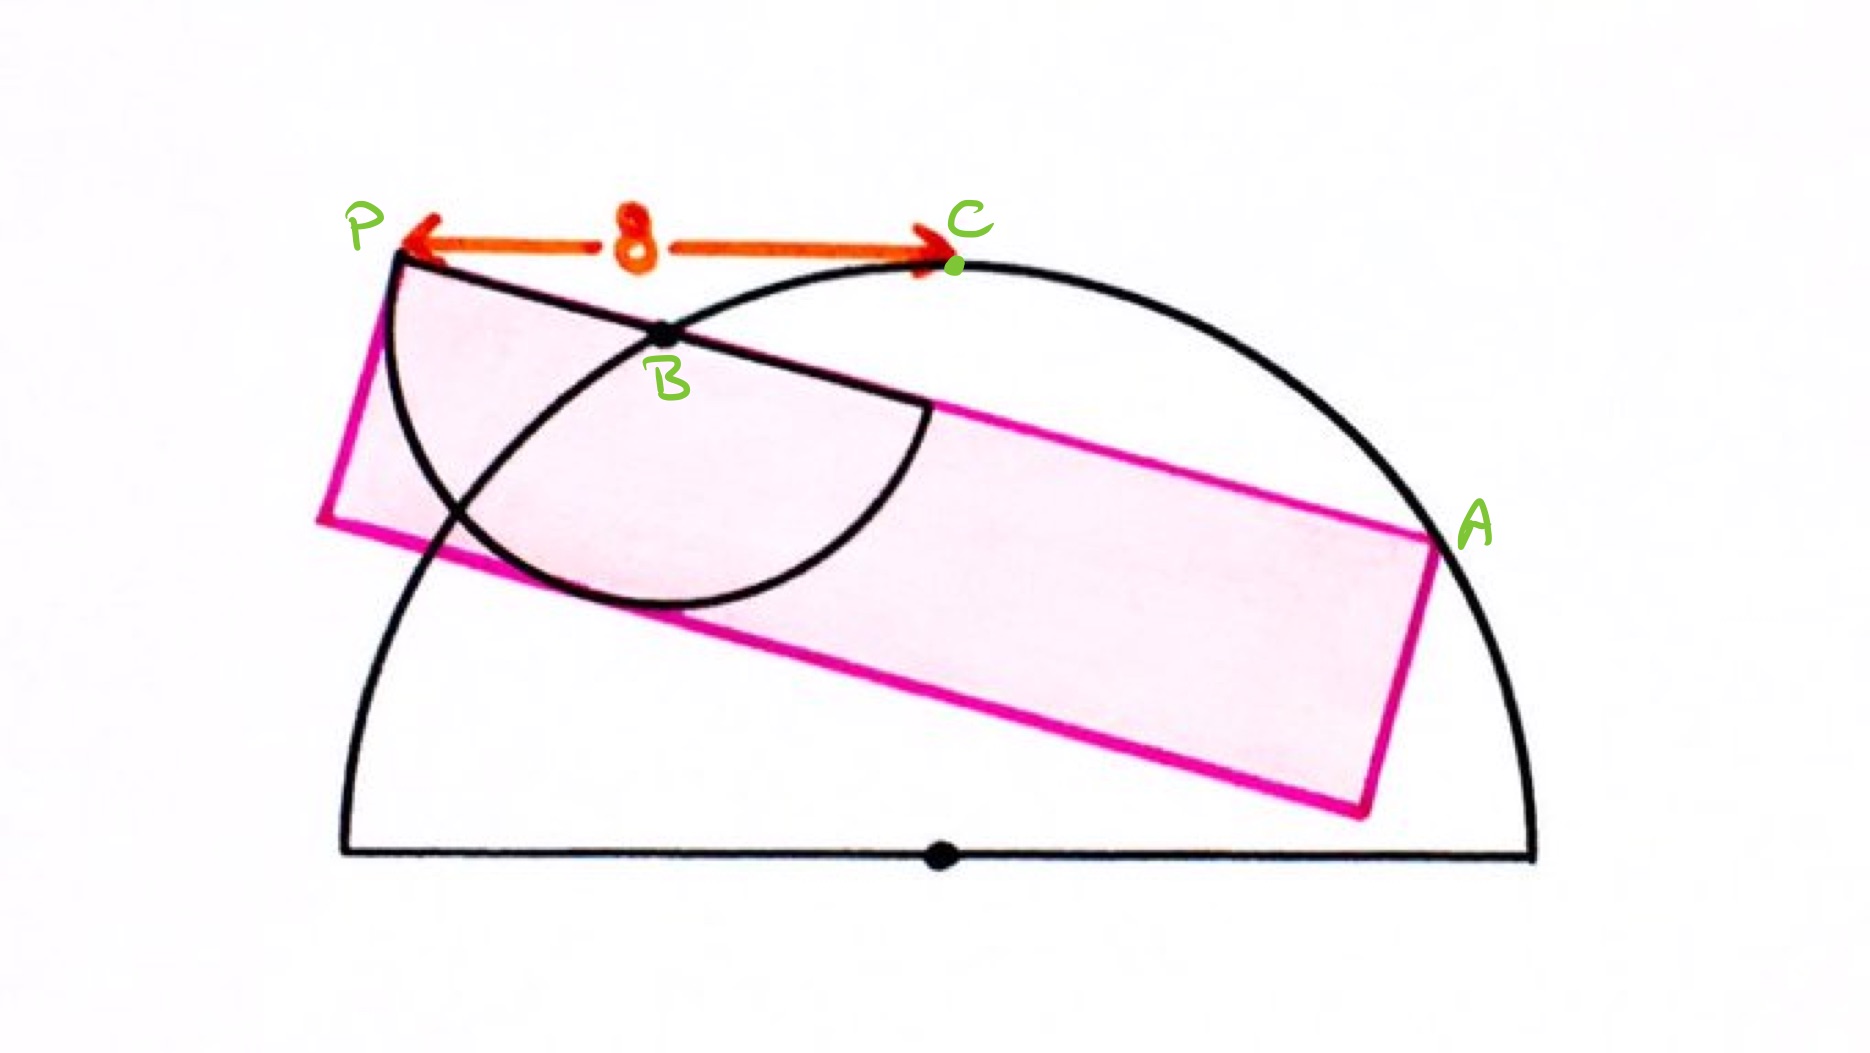 Two semi-circles and a rectangle labelled